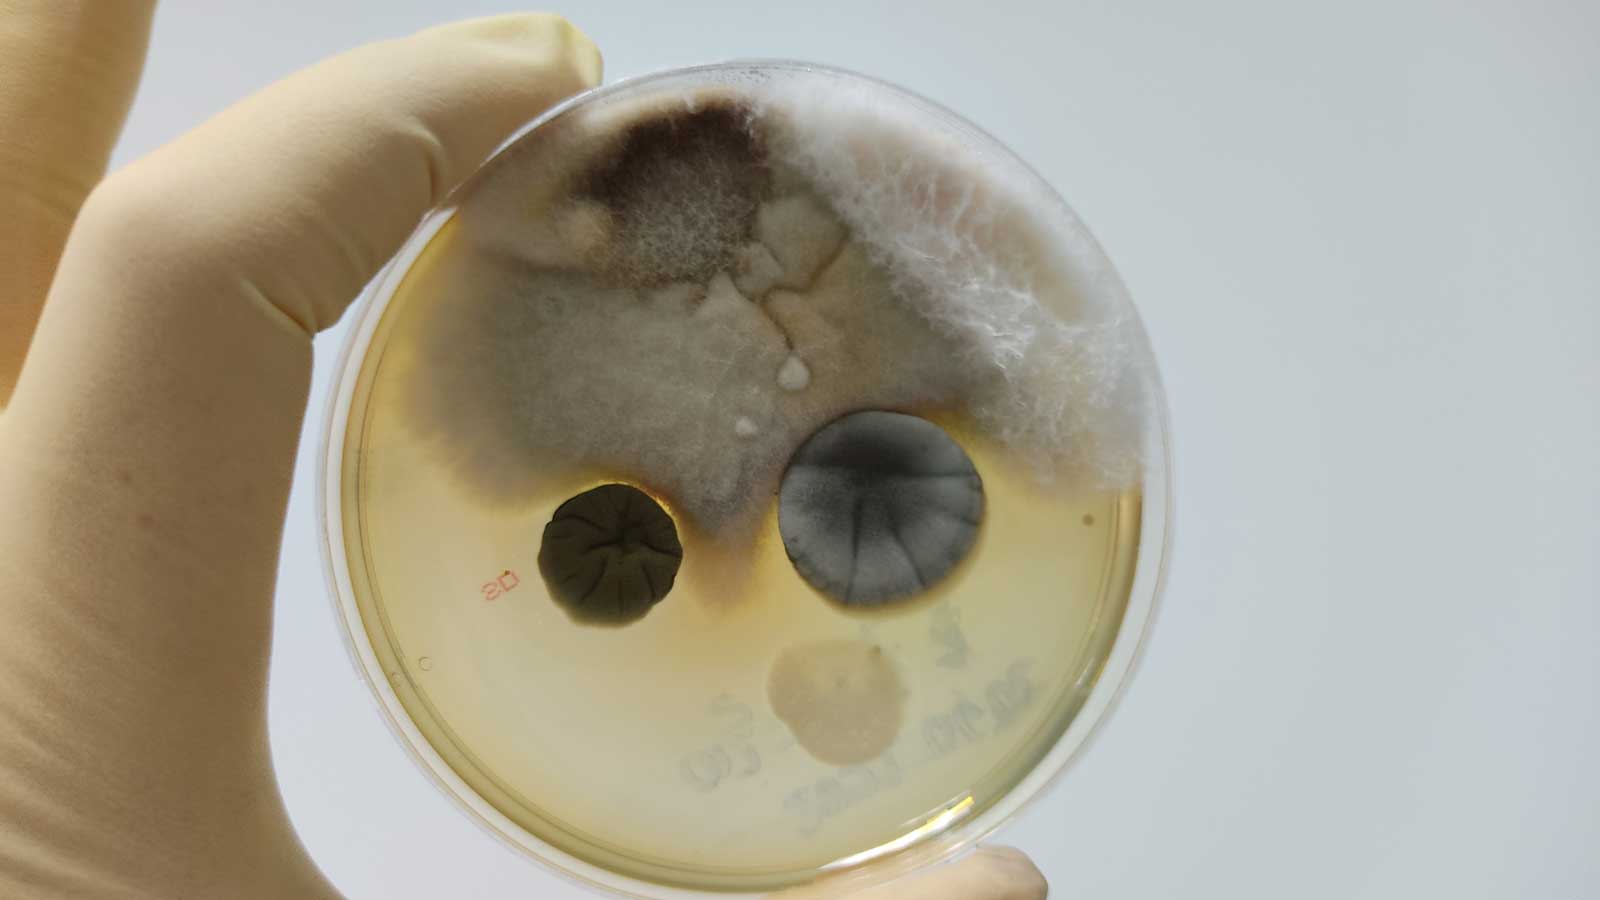 mold test results from a mold testing company